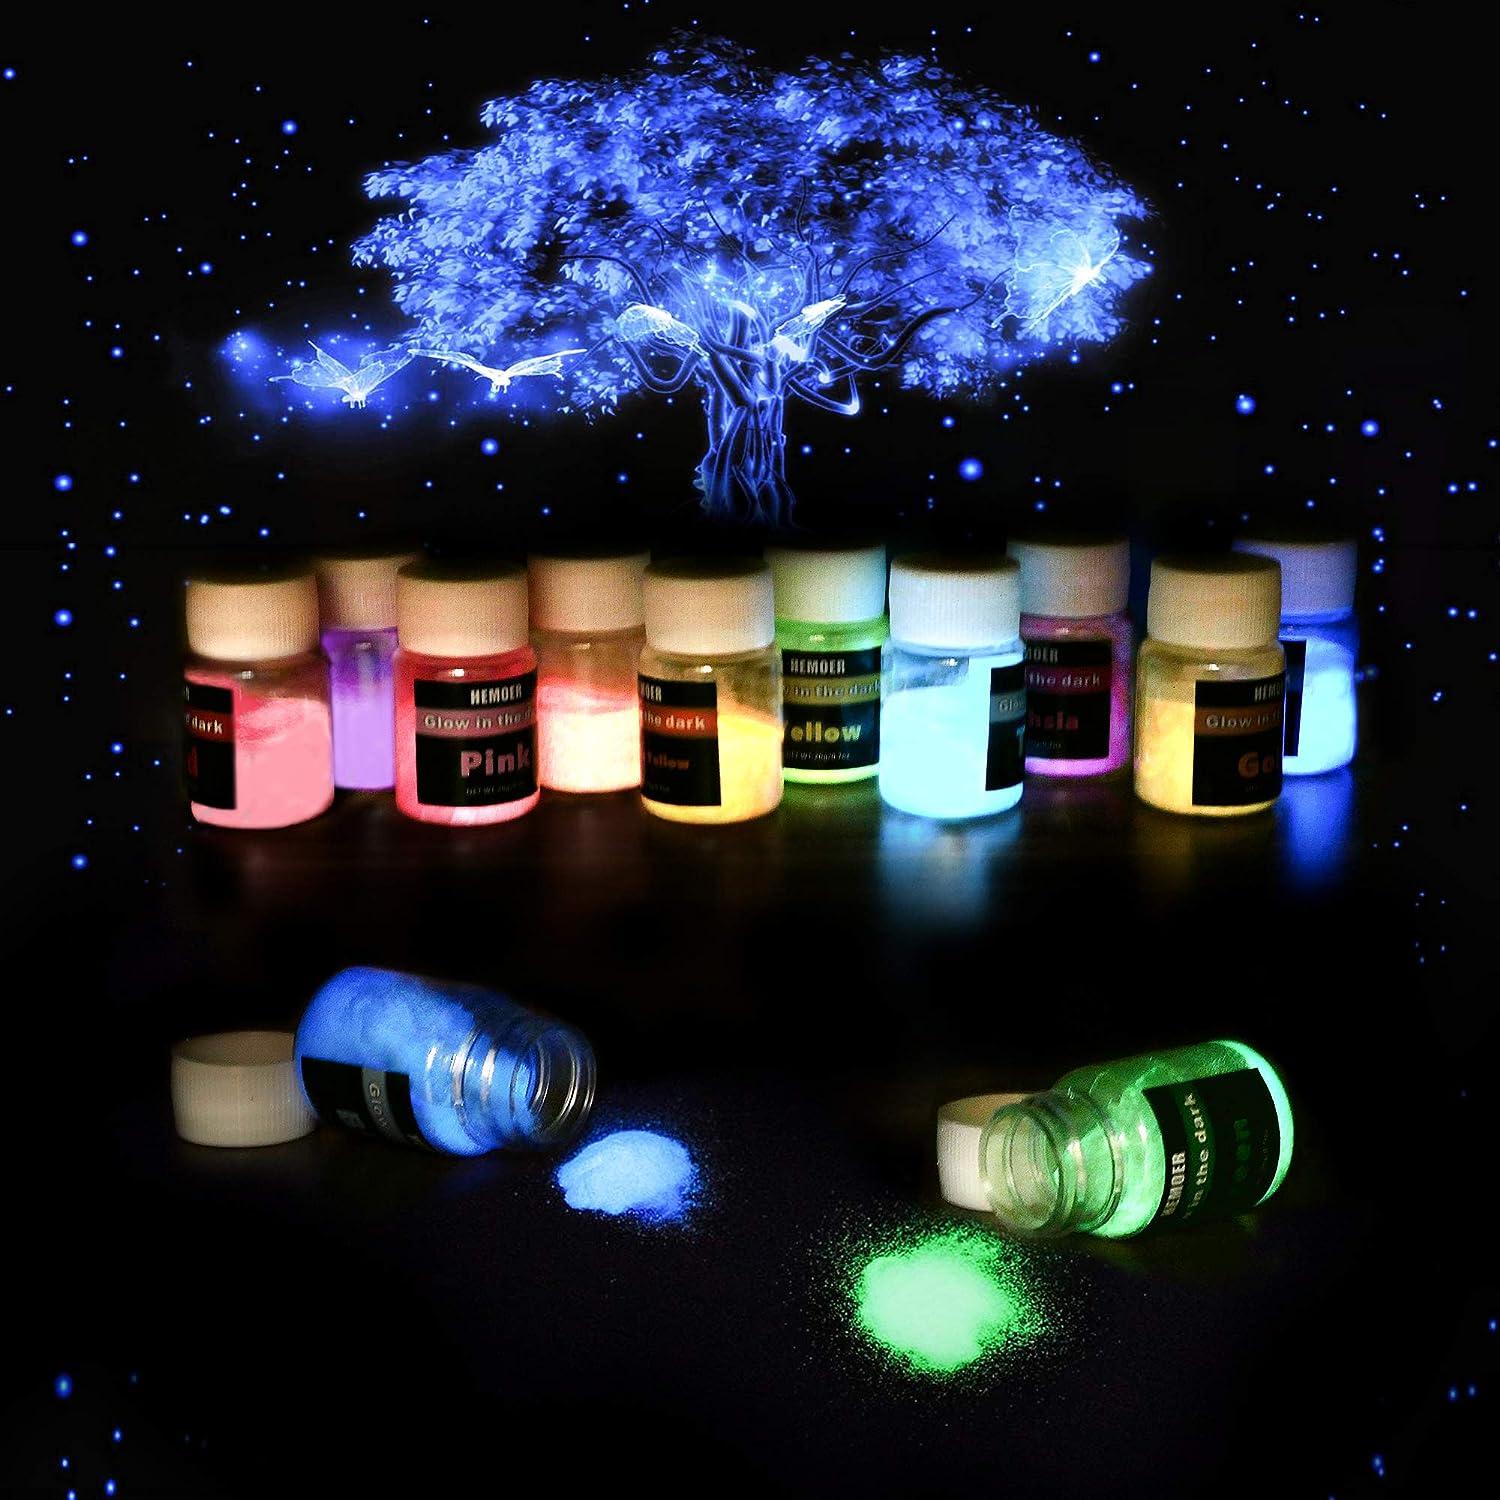 Blue Glow in the Dark Mica Powder Crafts Resin Soap Candles Nails